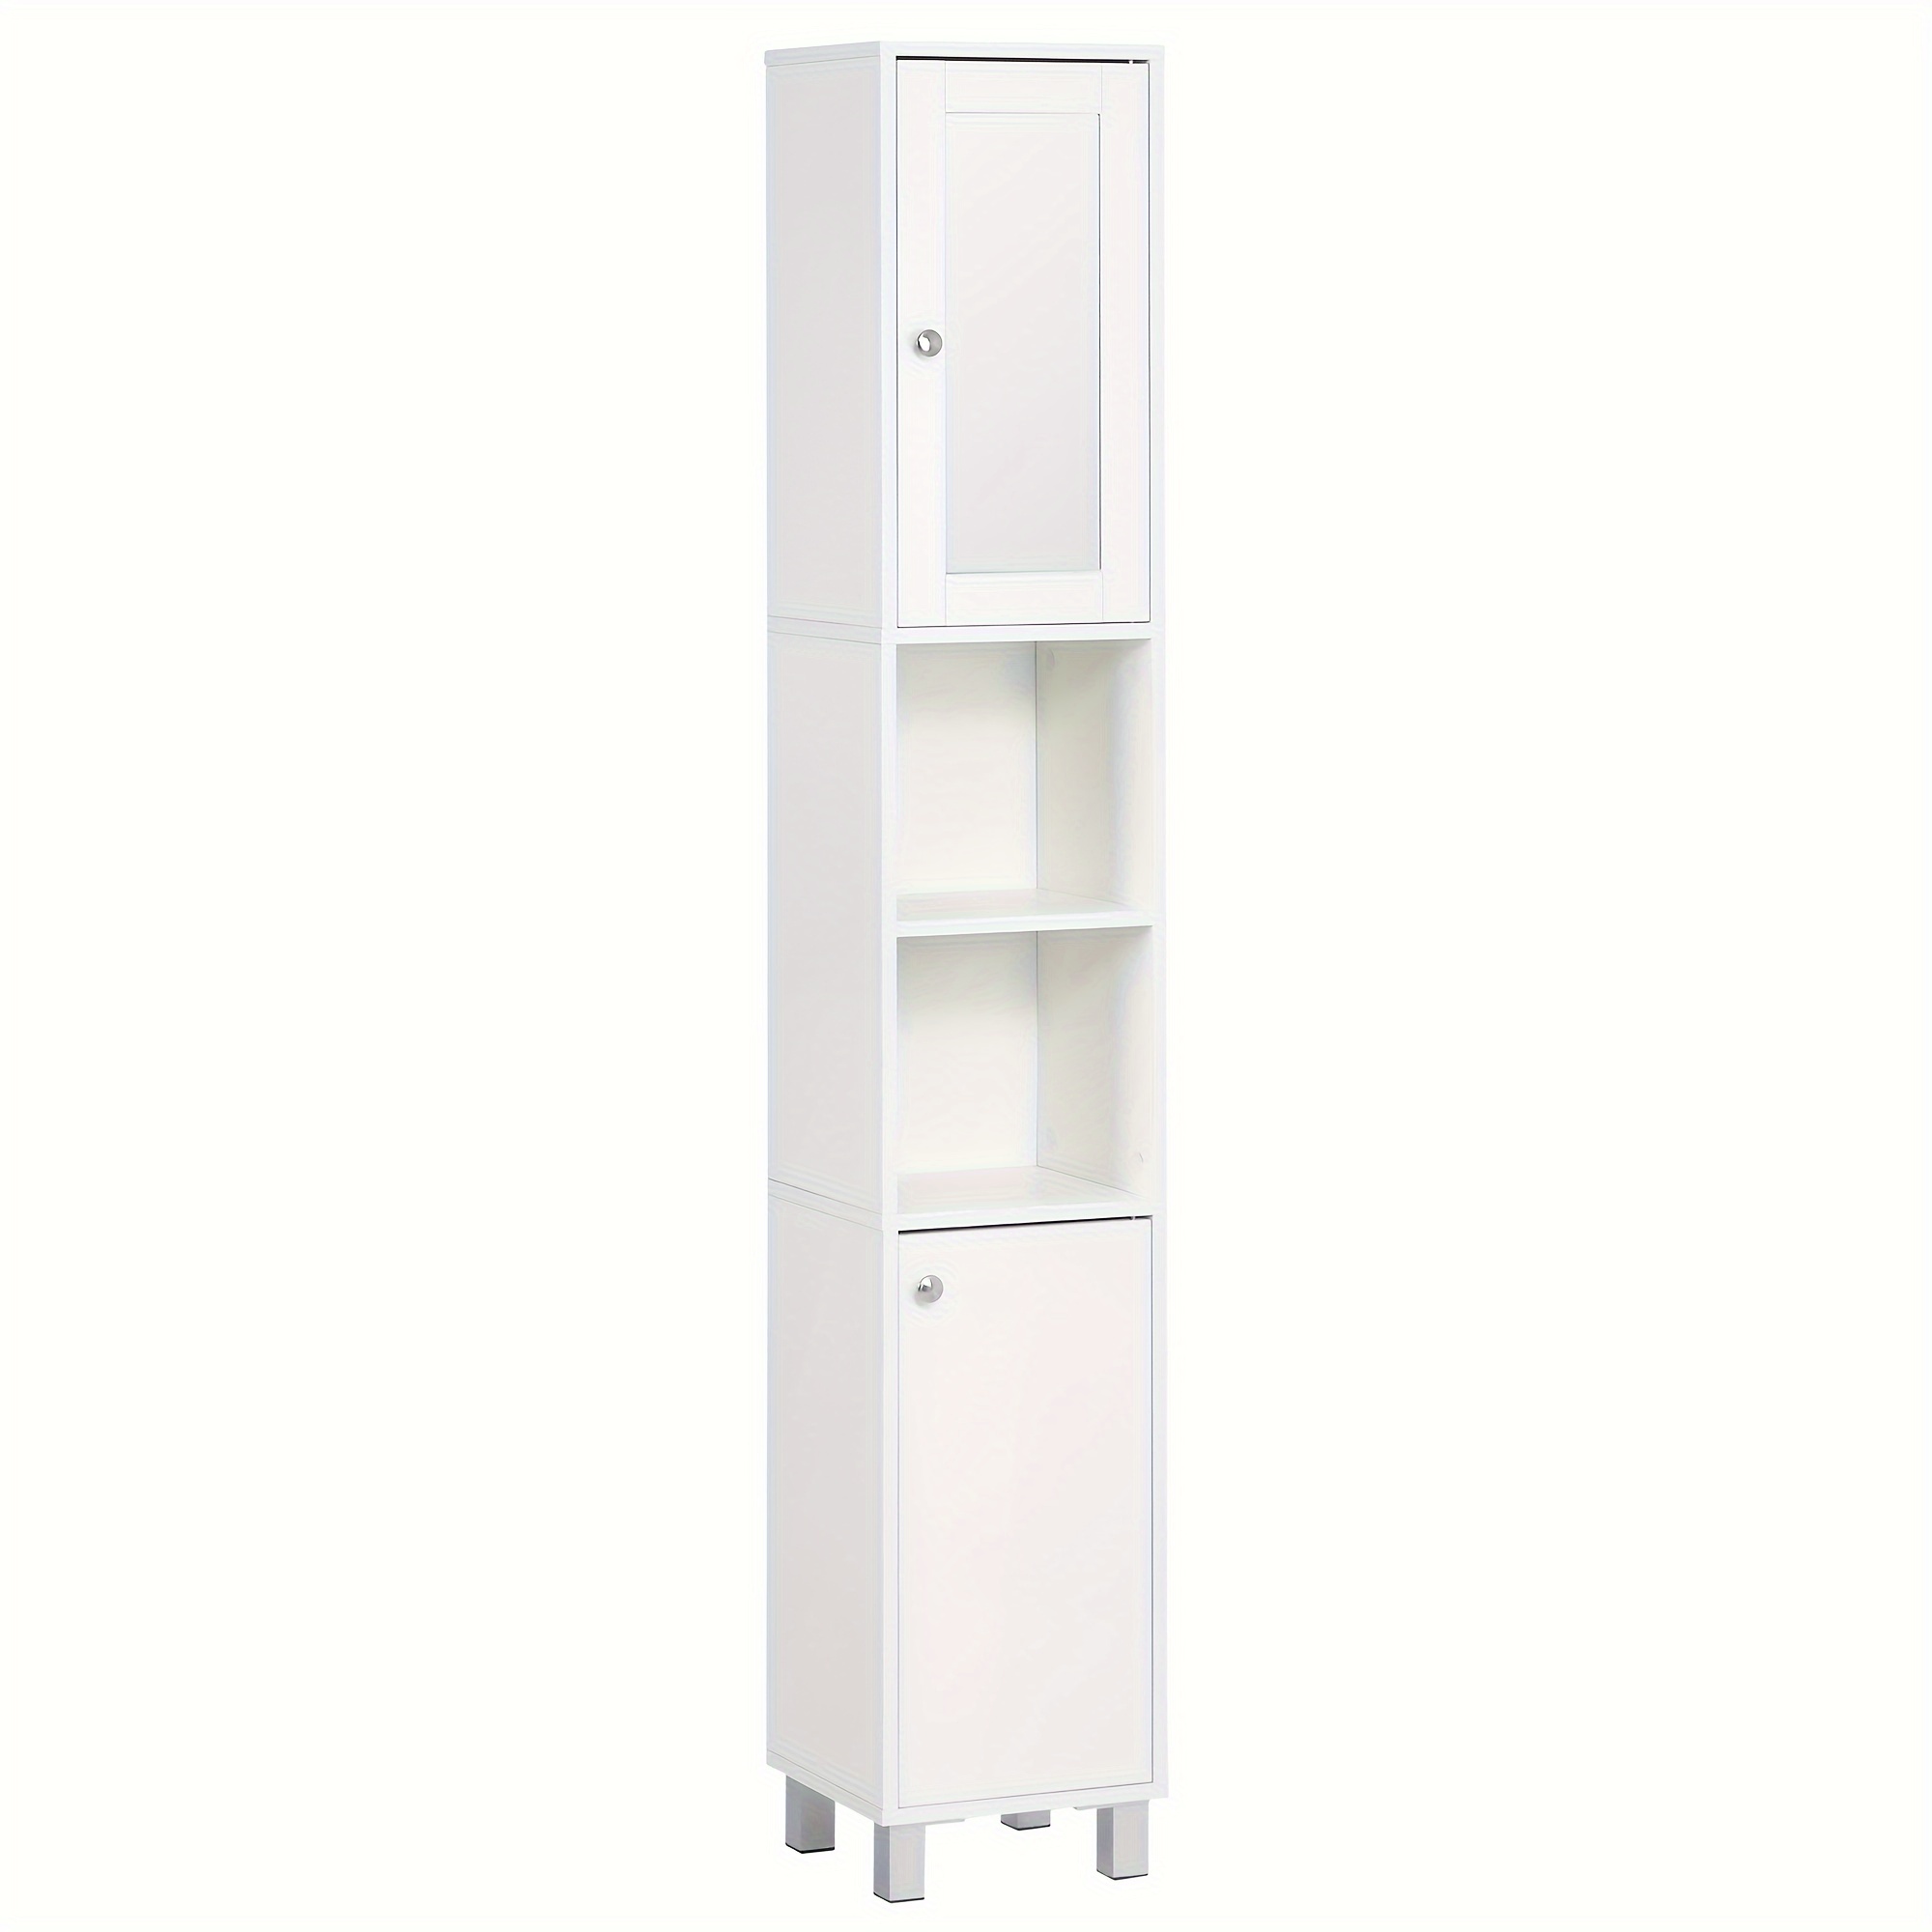 

Kleankin Tall Bathroom Storage Cabinet With Mirror, Wooden Freestanding Tower Cabinet With Adjustable Shelves For Bathroom Or Living Room, White